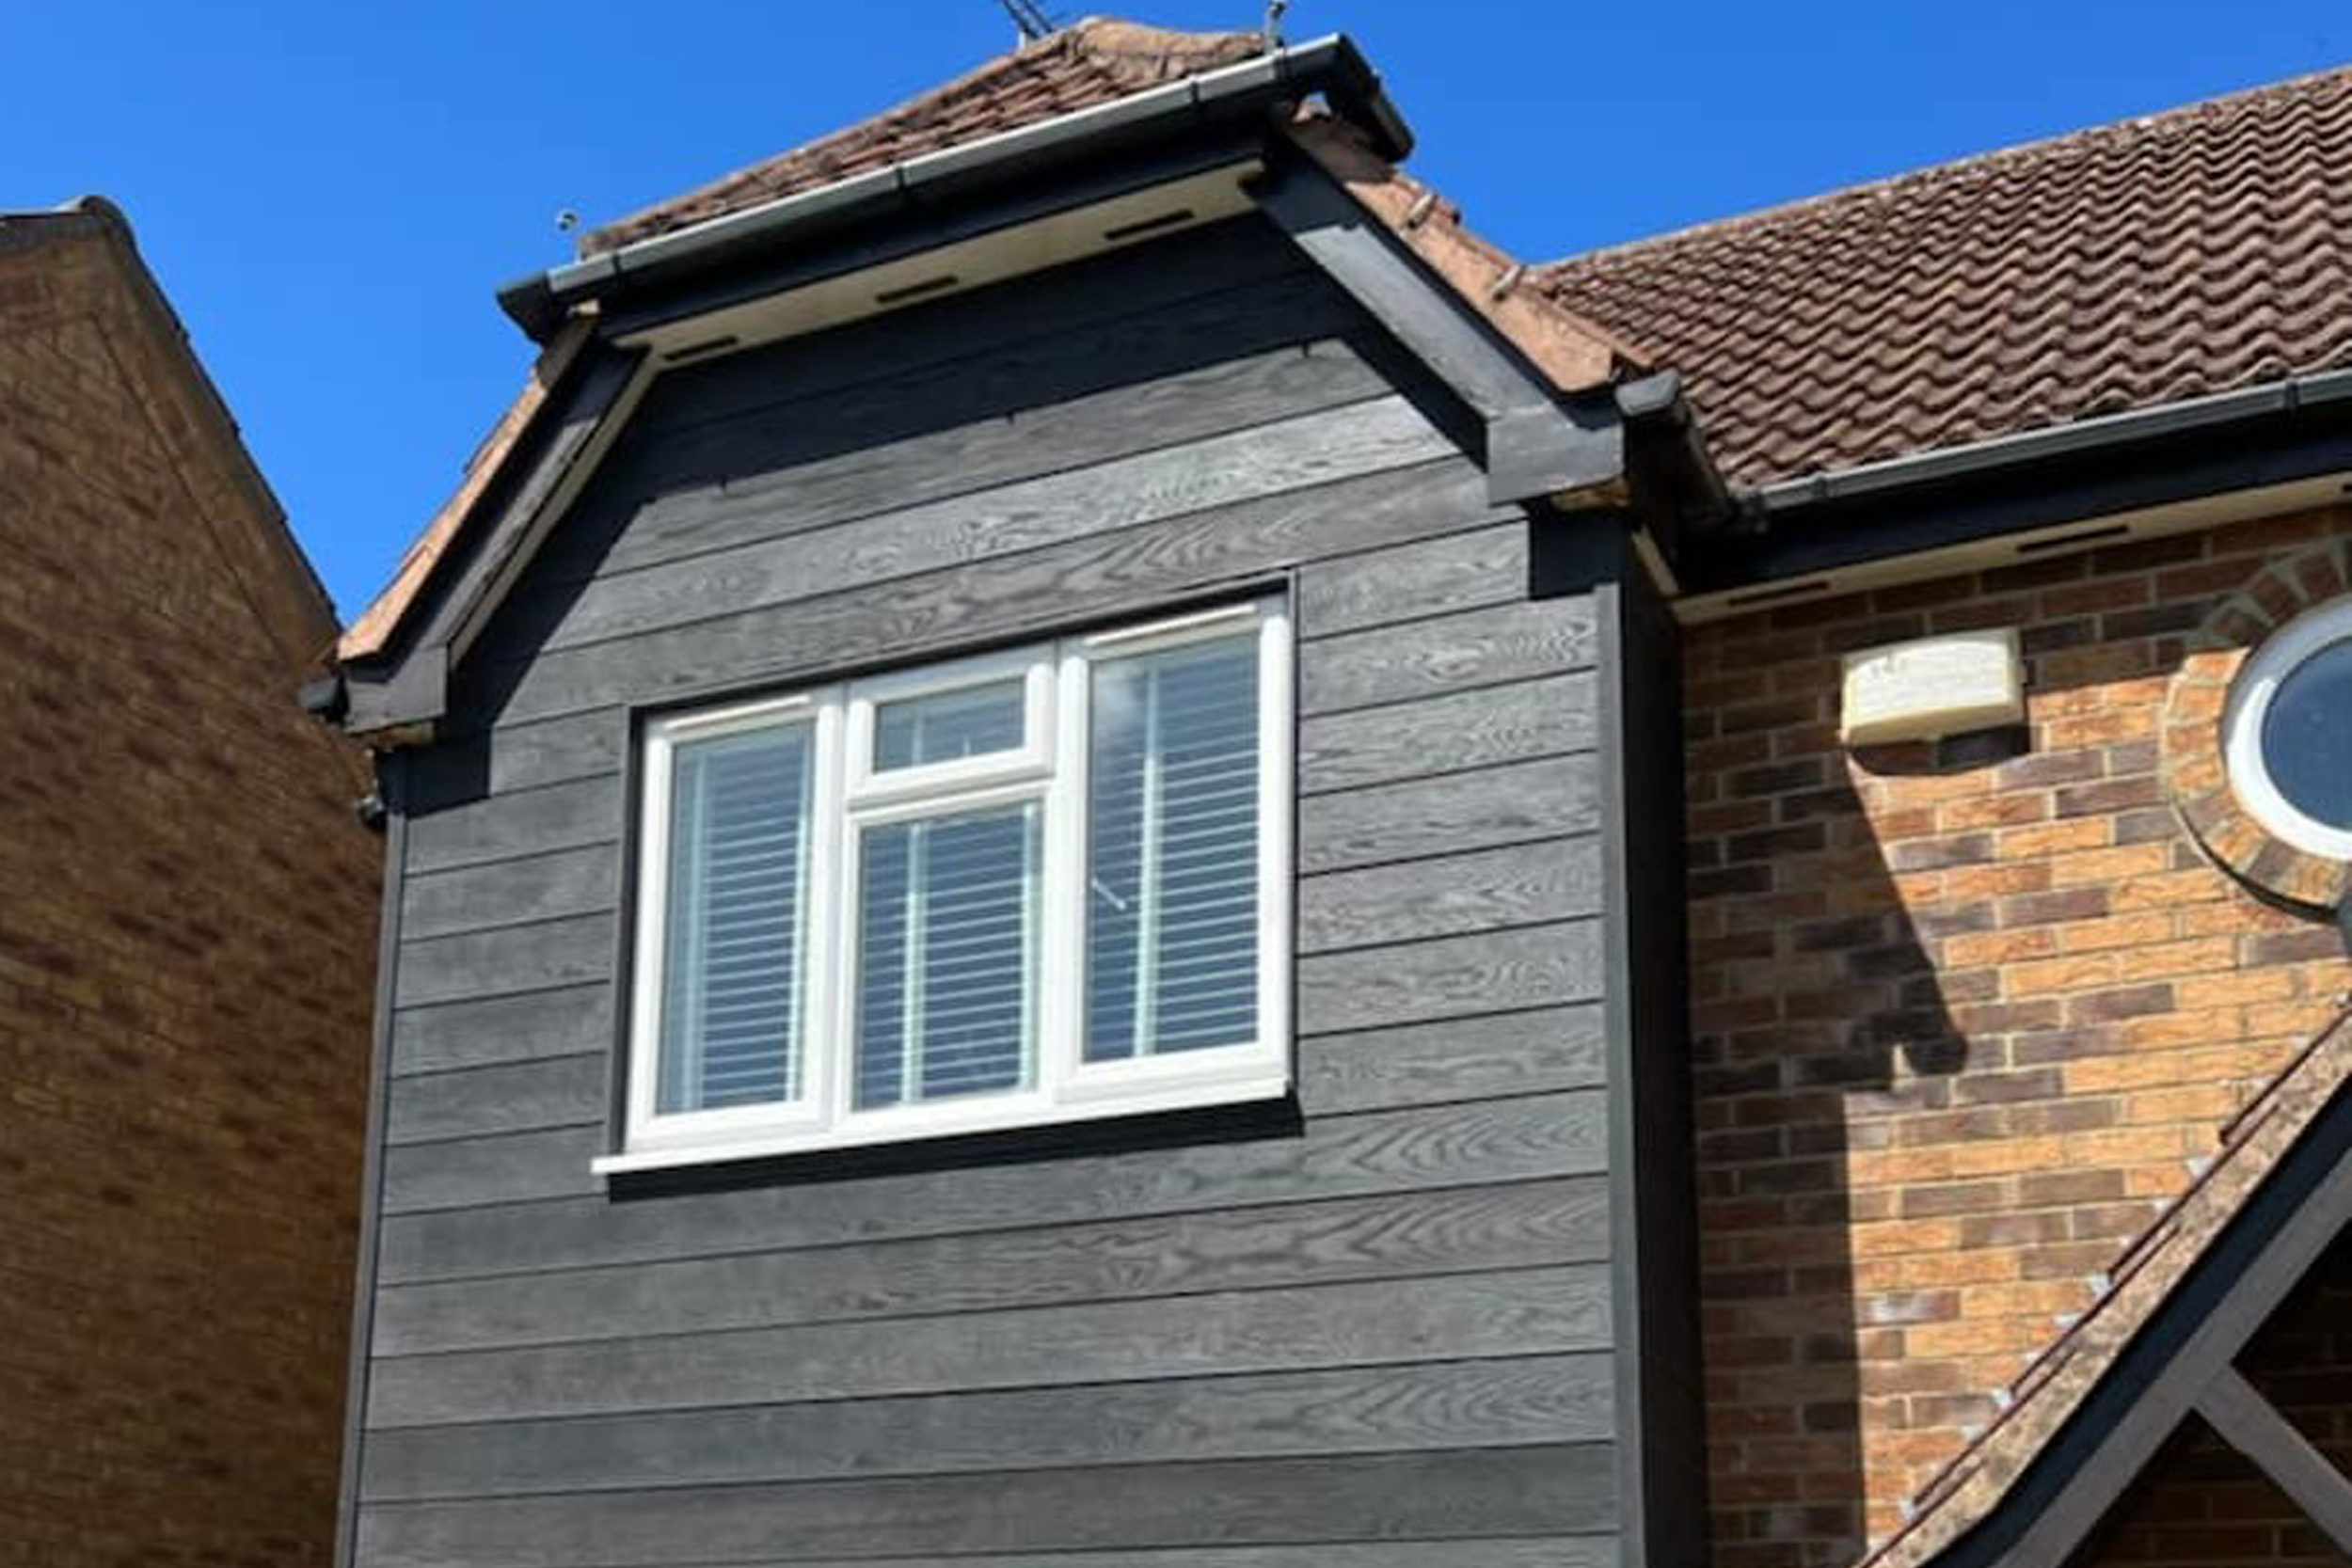 Wyldwood Composite Cladding Installers in Hampshire